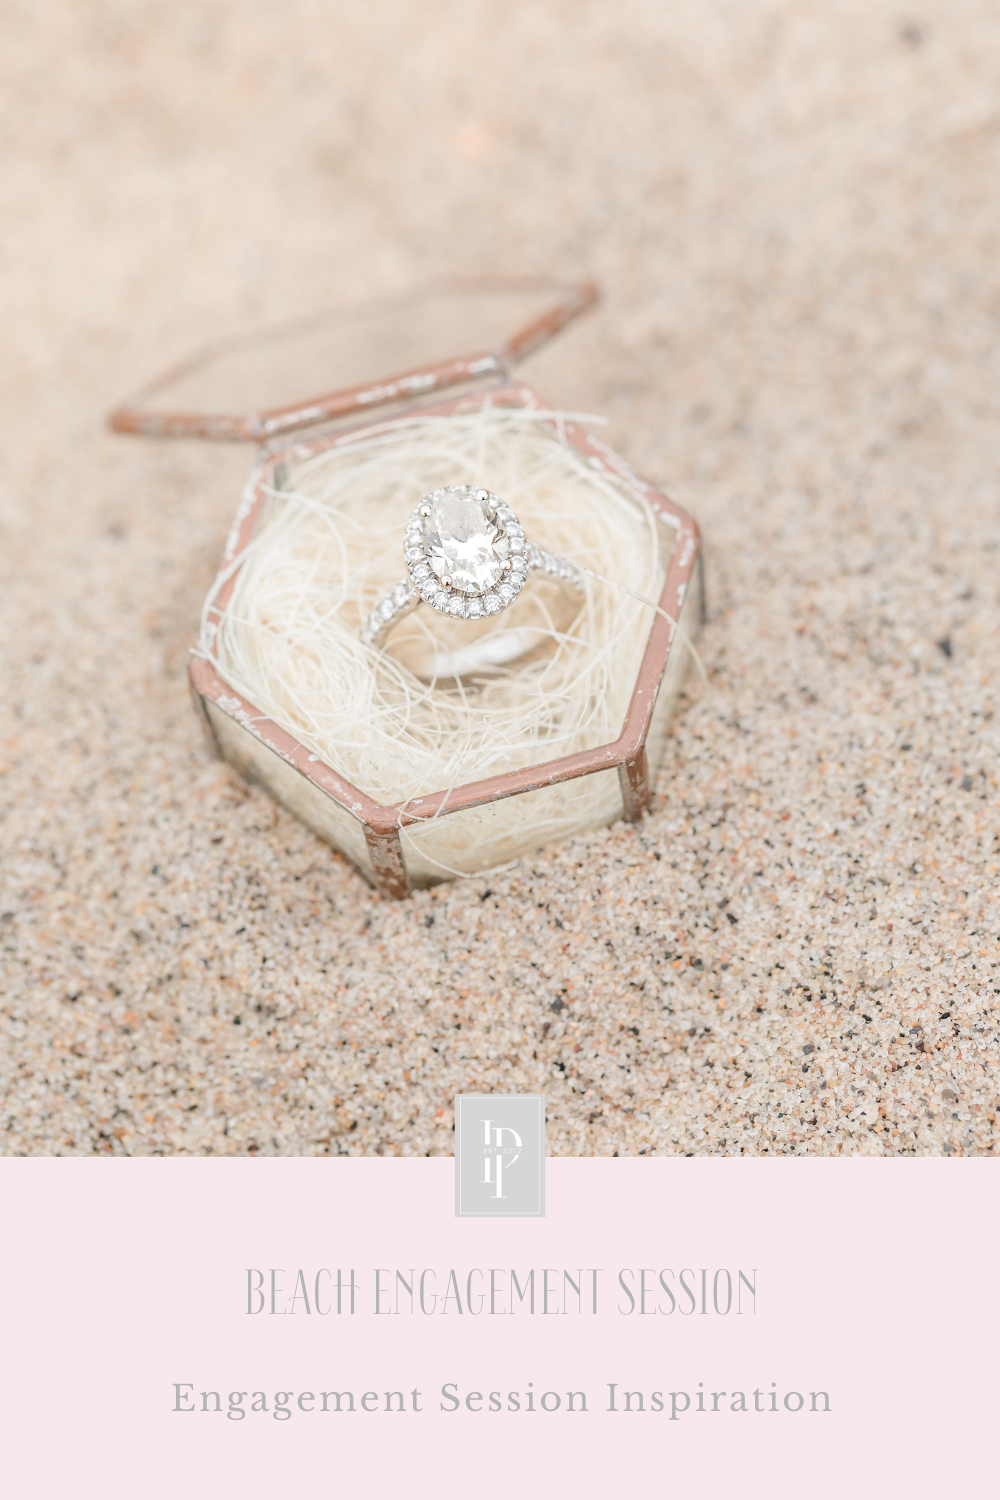 Union Beach engagement session on the beach for New Jersey couple with NJ wedding photographer Idalia Photography